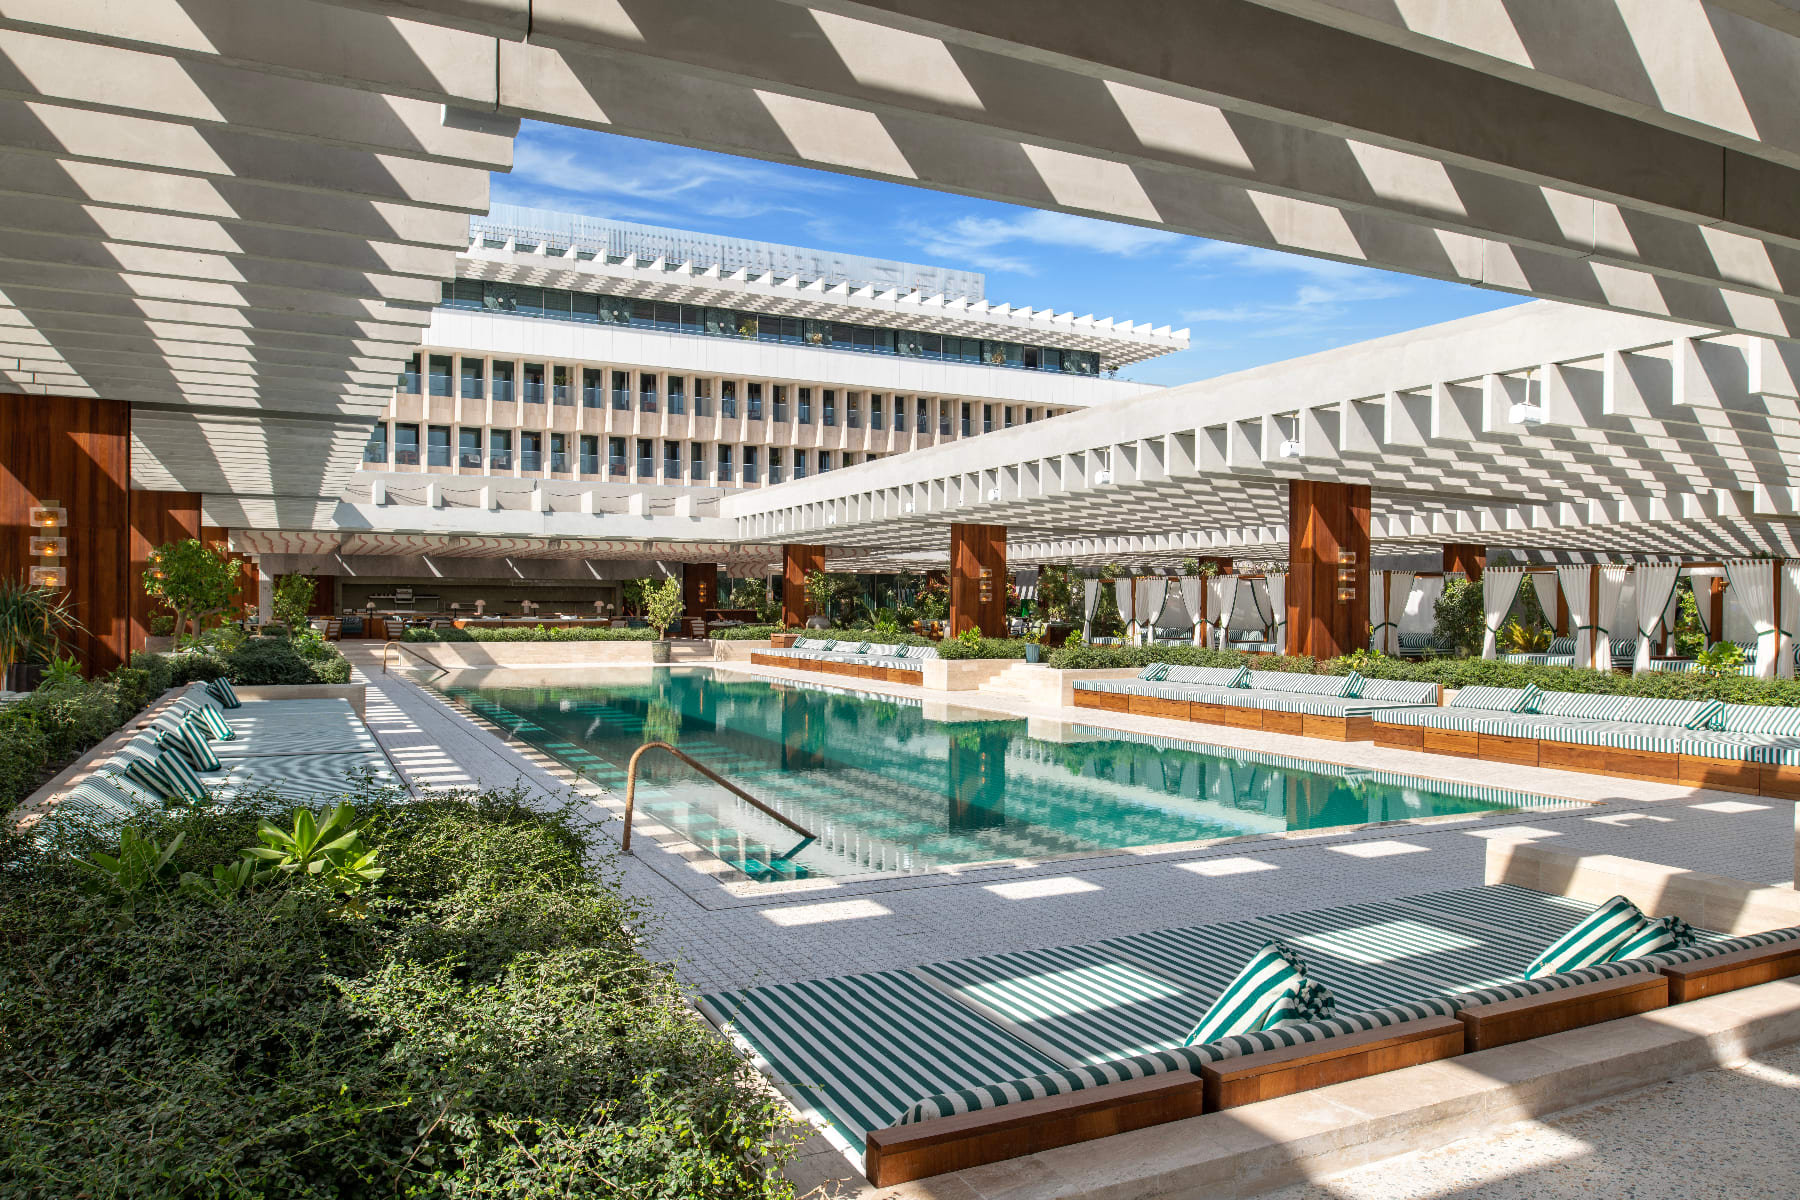 The super-chic pool area at the Ned Doha